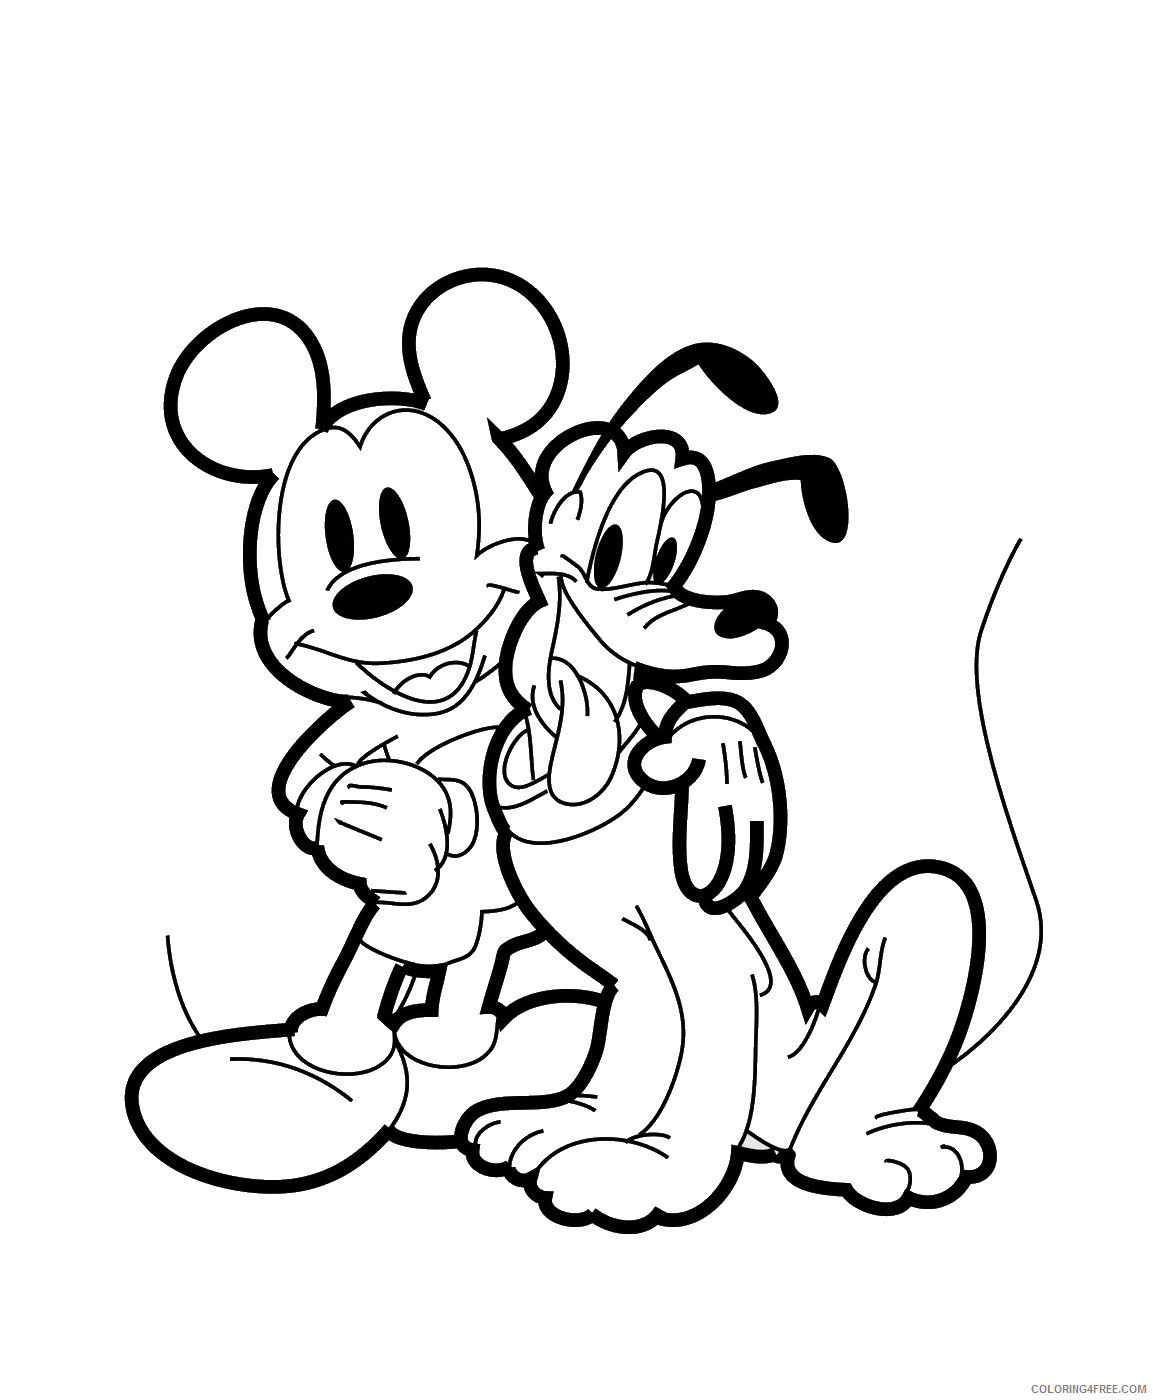 Pluto Coloring Pages Cartoons pluto_cl_03 Printable 2020 4925 Coloring4free